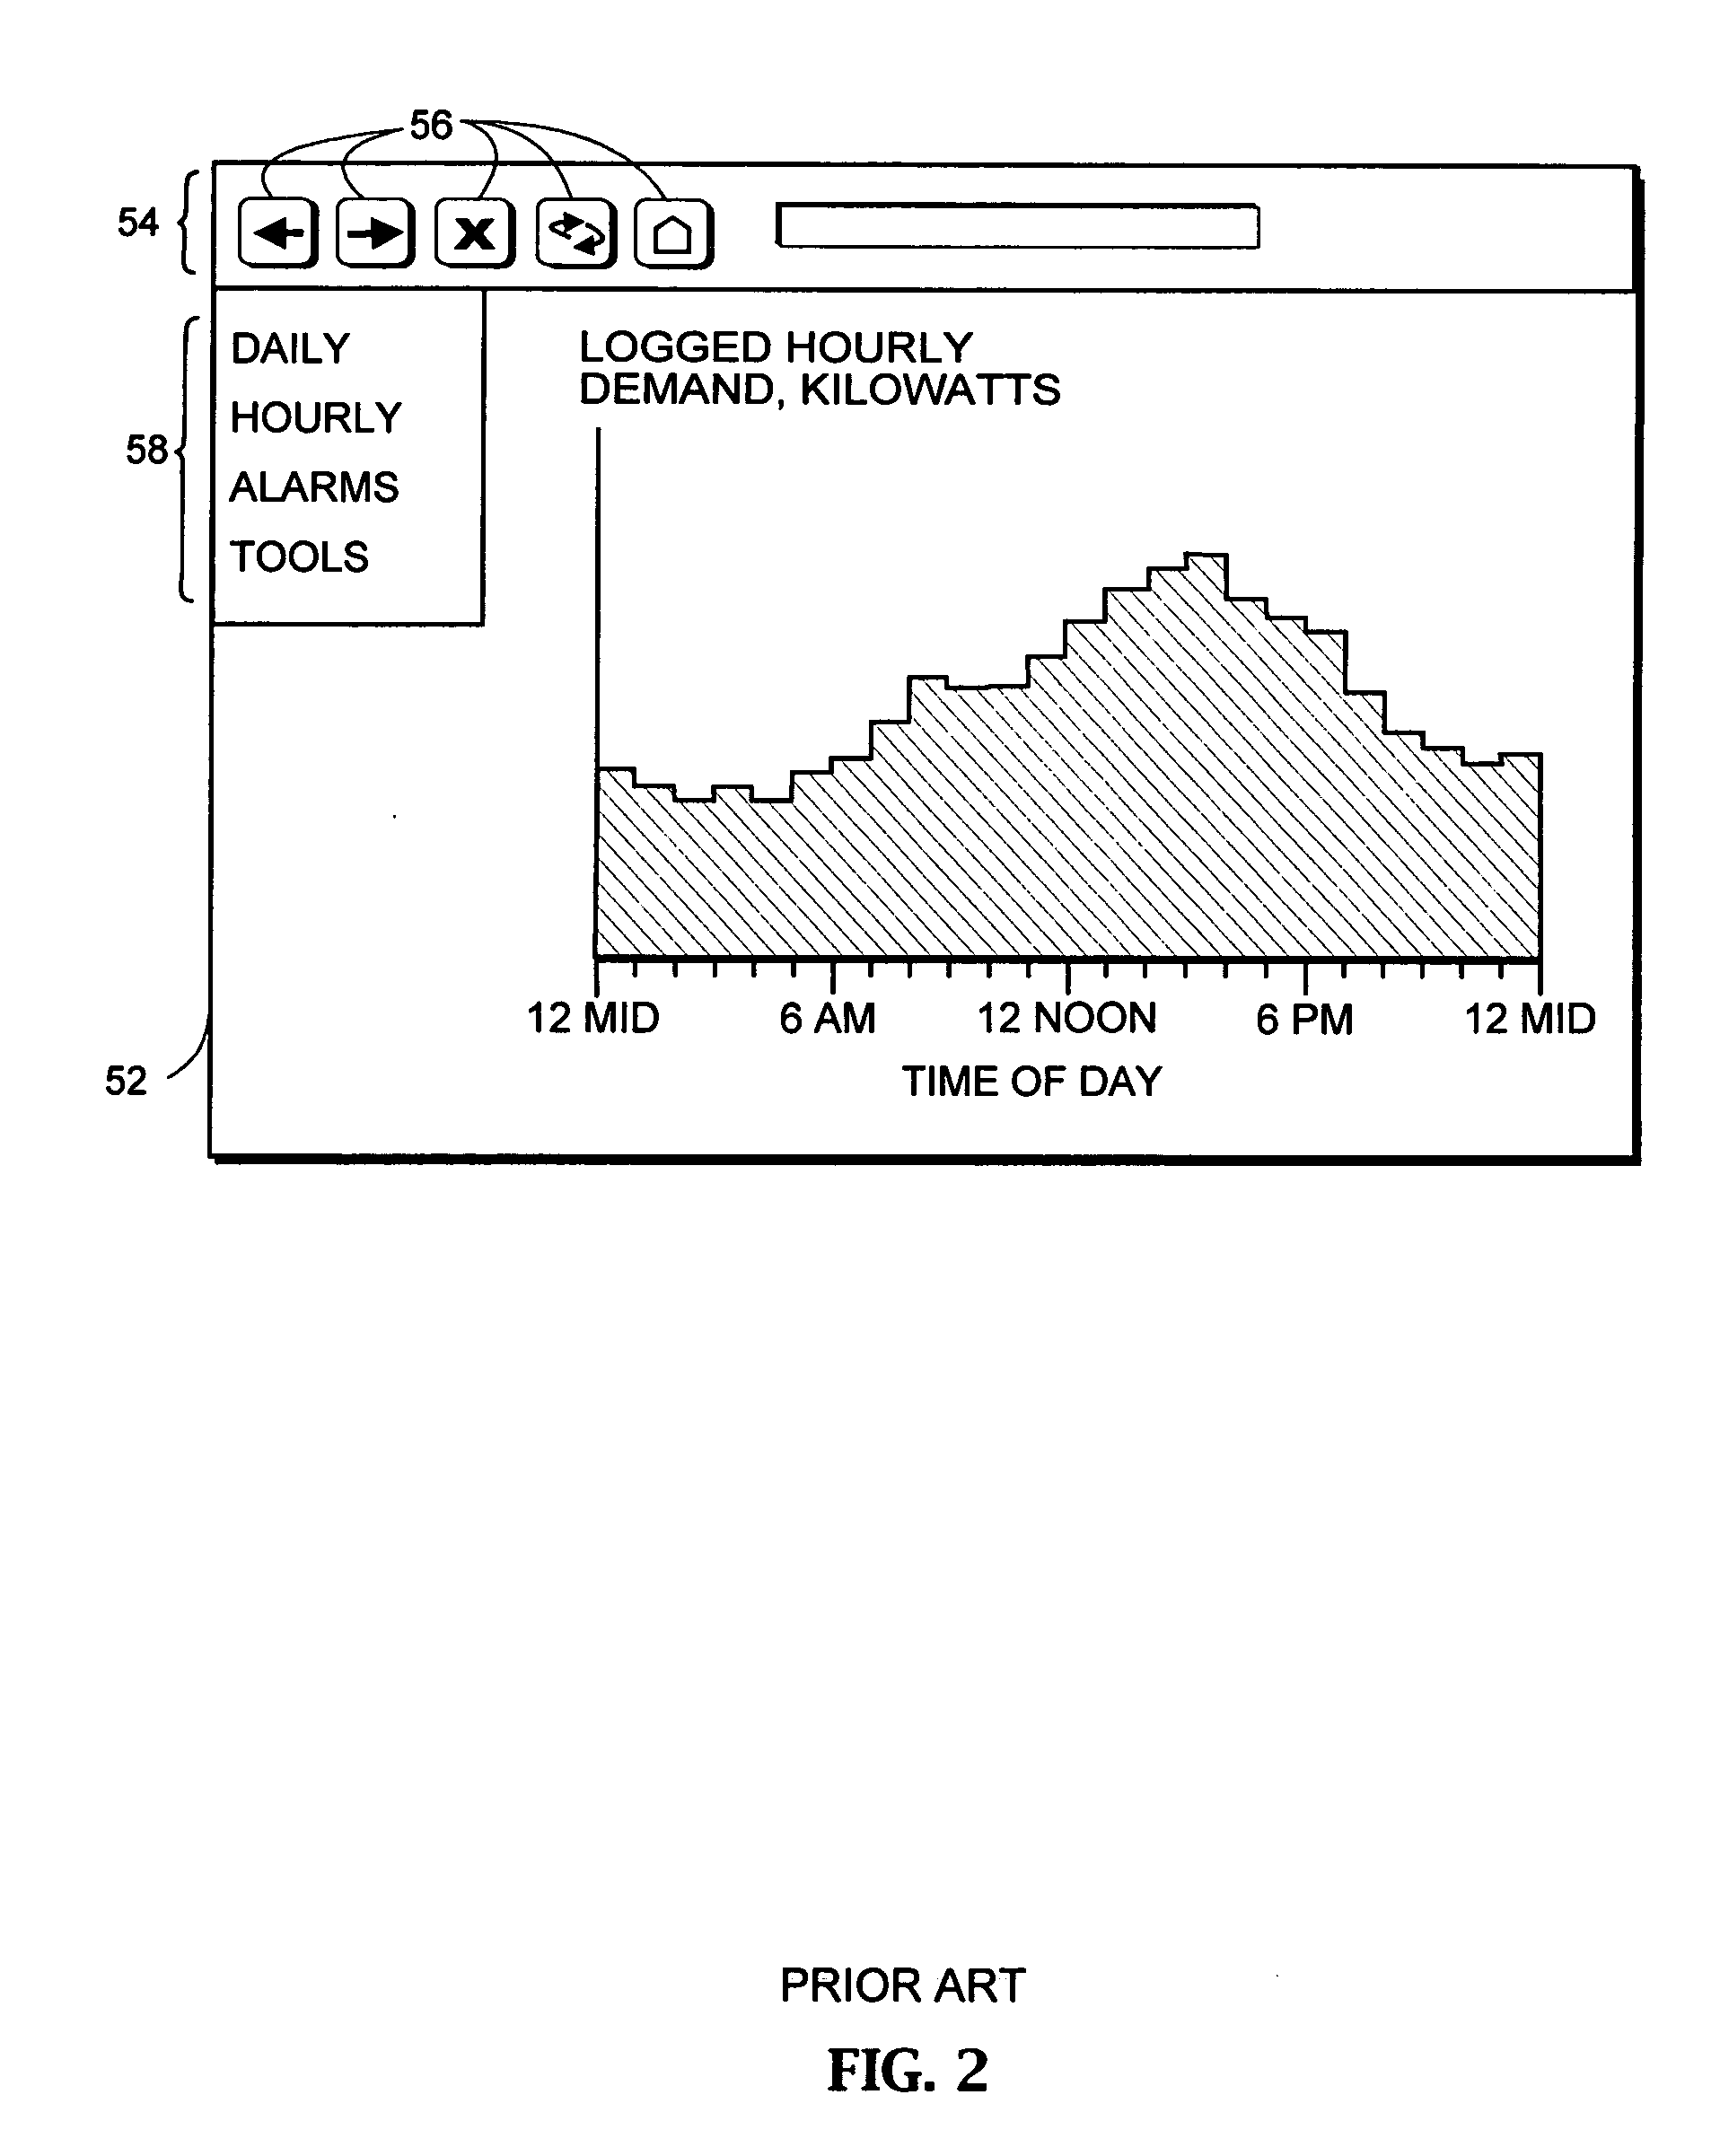 Method for providing comprehensive electrical usage and demand data